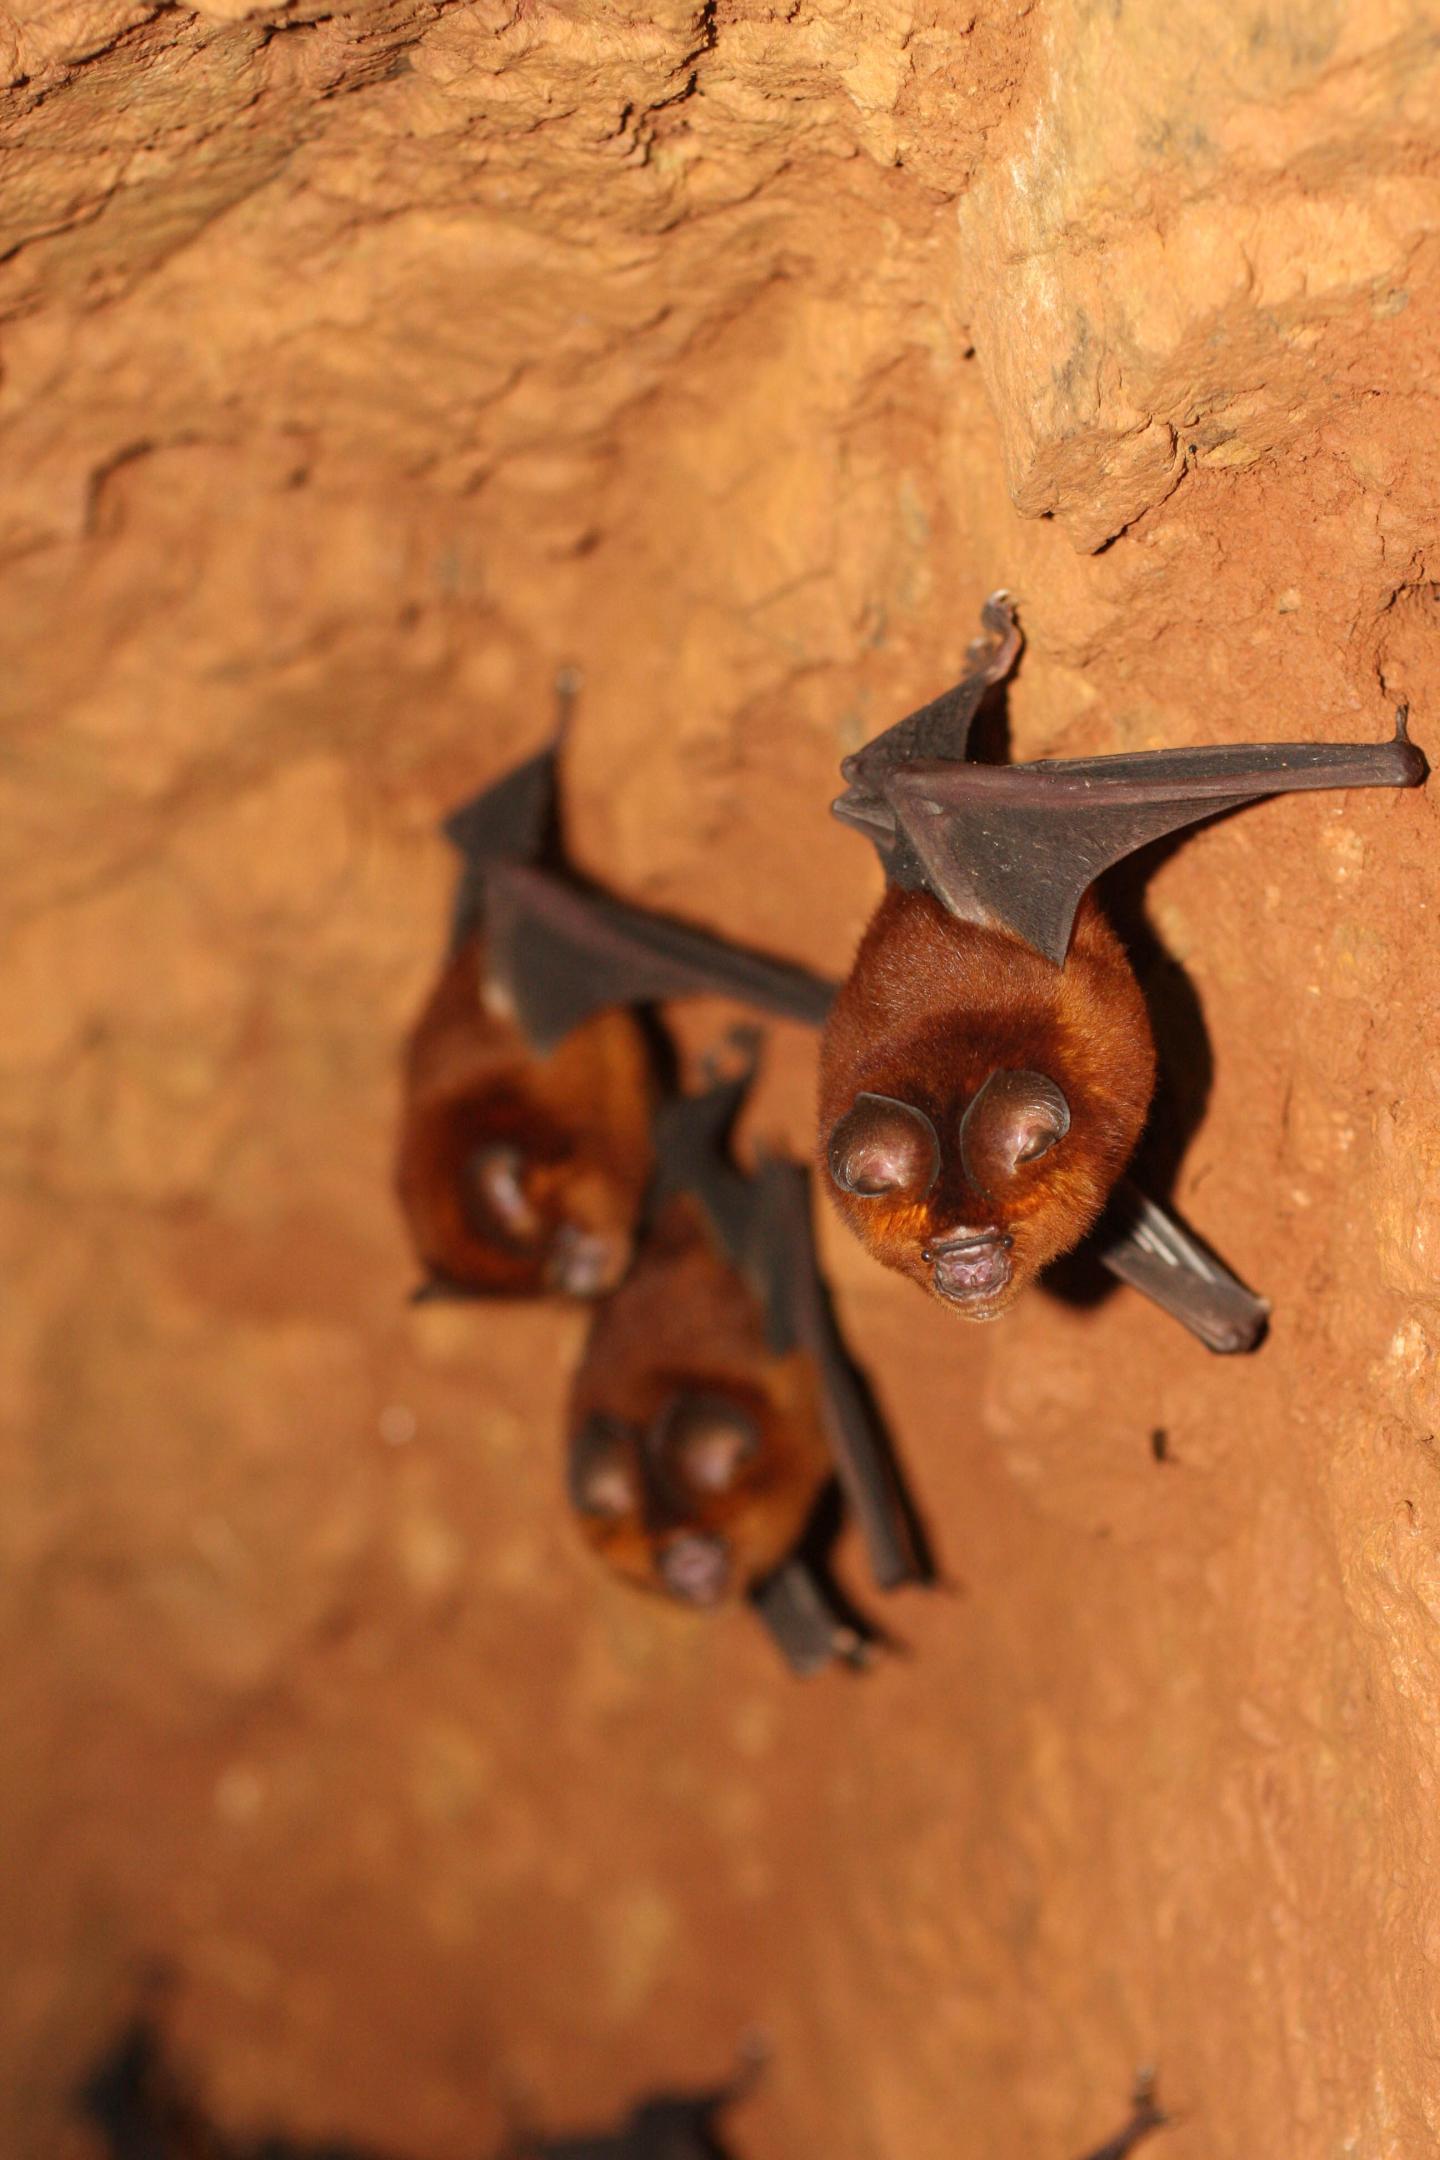 A Colony of a New, Yet to Be Described Species of Bat